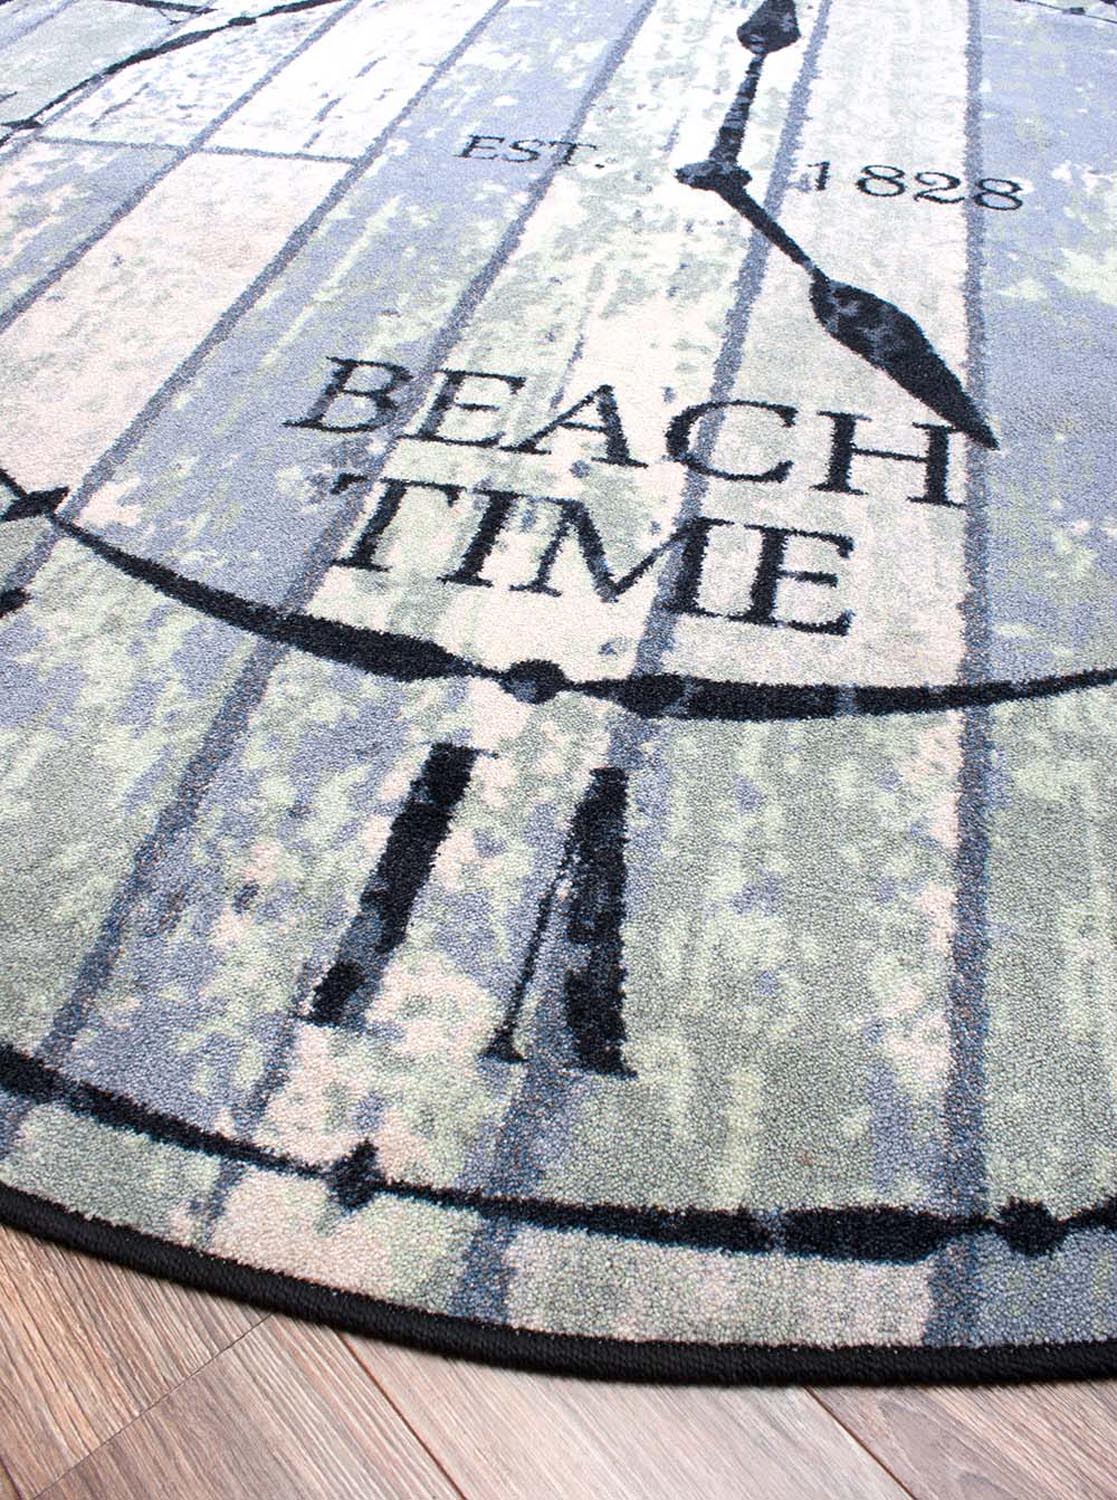 Beach Time - Distressed: Coastal Clock Scene Area Rug for Relaxation.